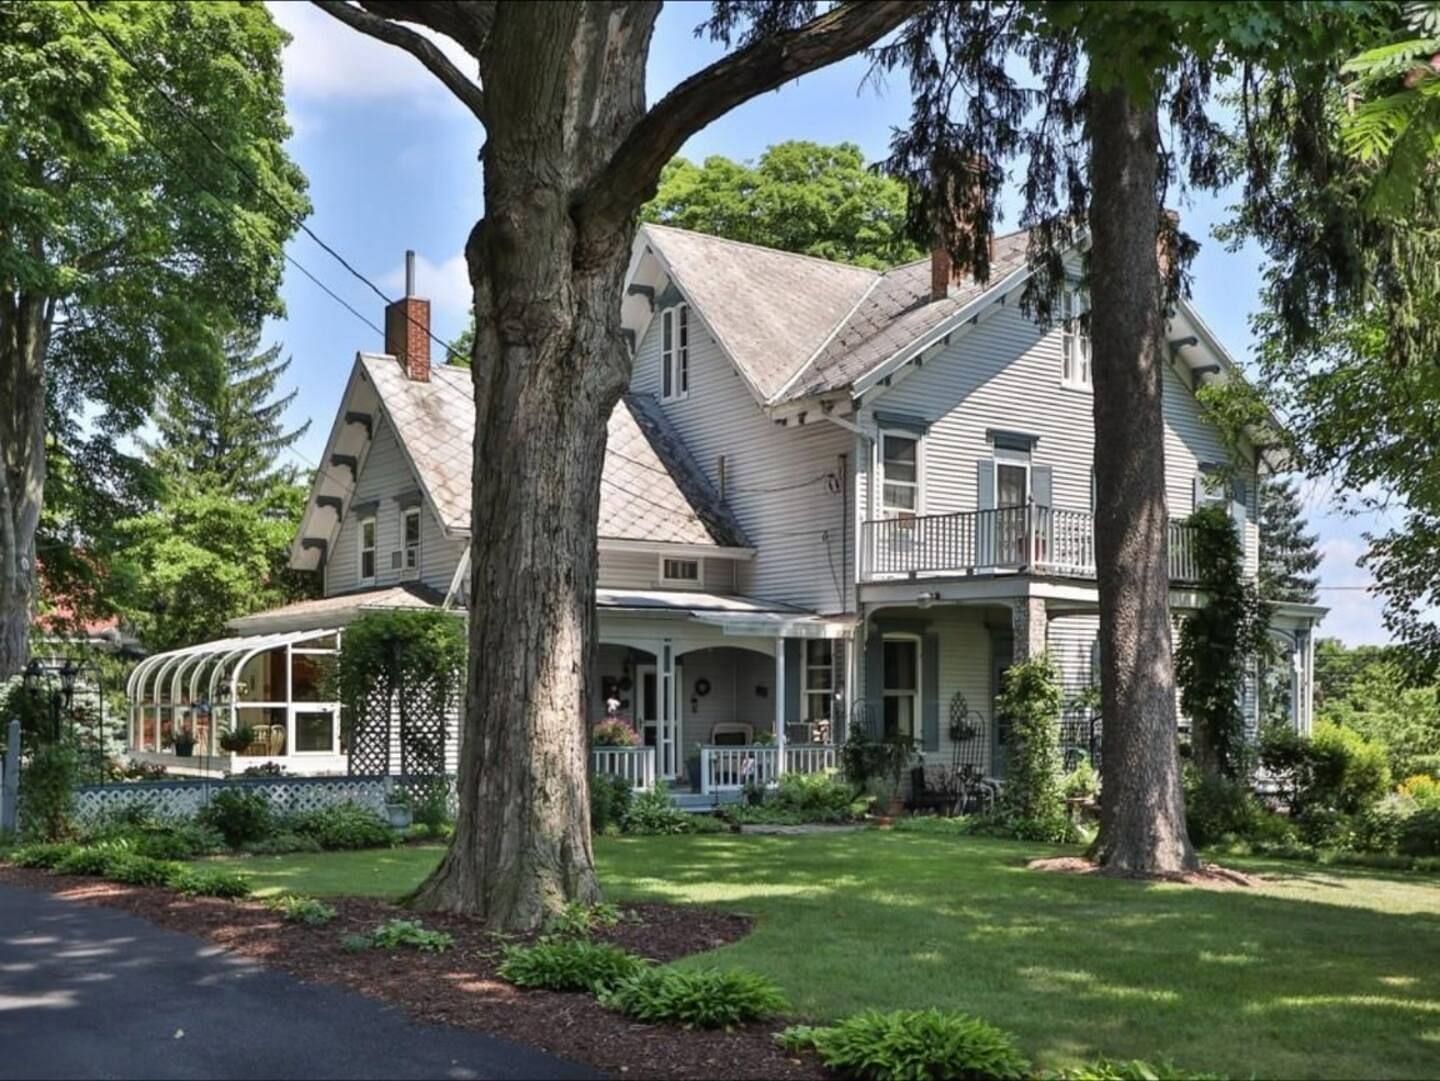 JWguest House at Chester, New York | Victorian Style Historic Home |  14 pax #1 | Jwbnb no brobnb 17